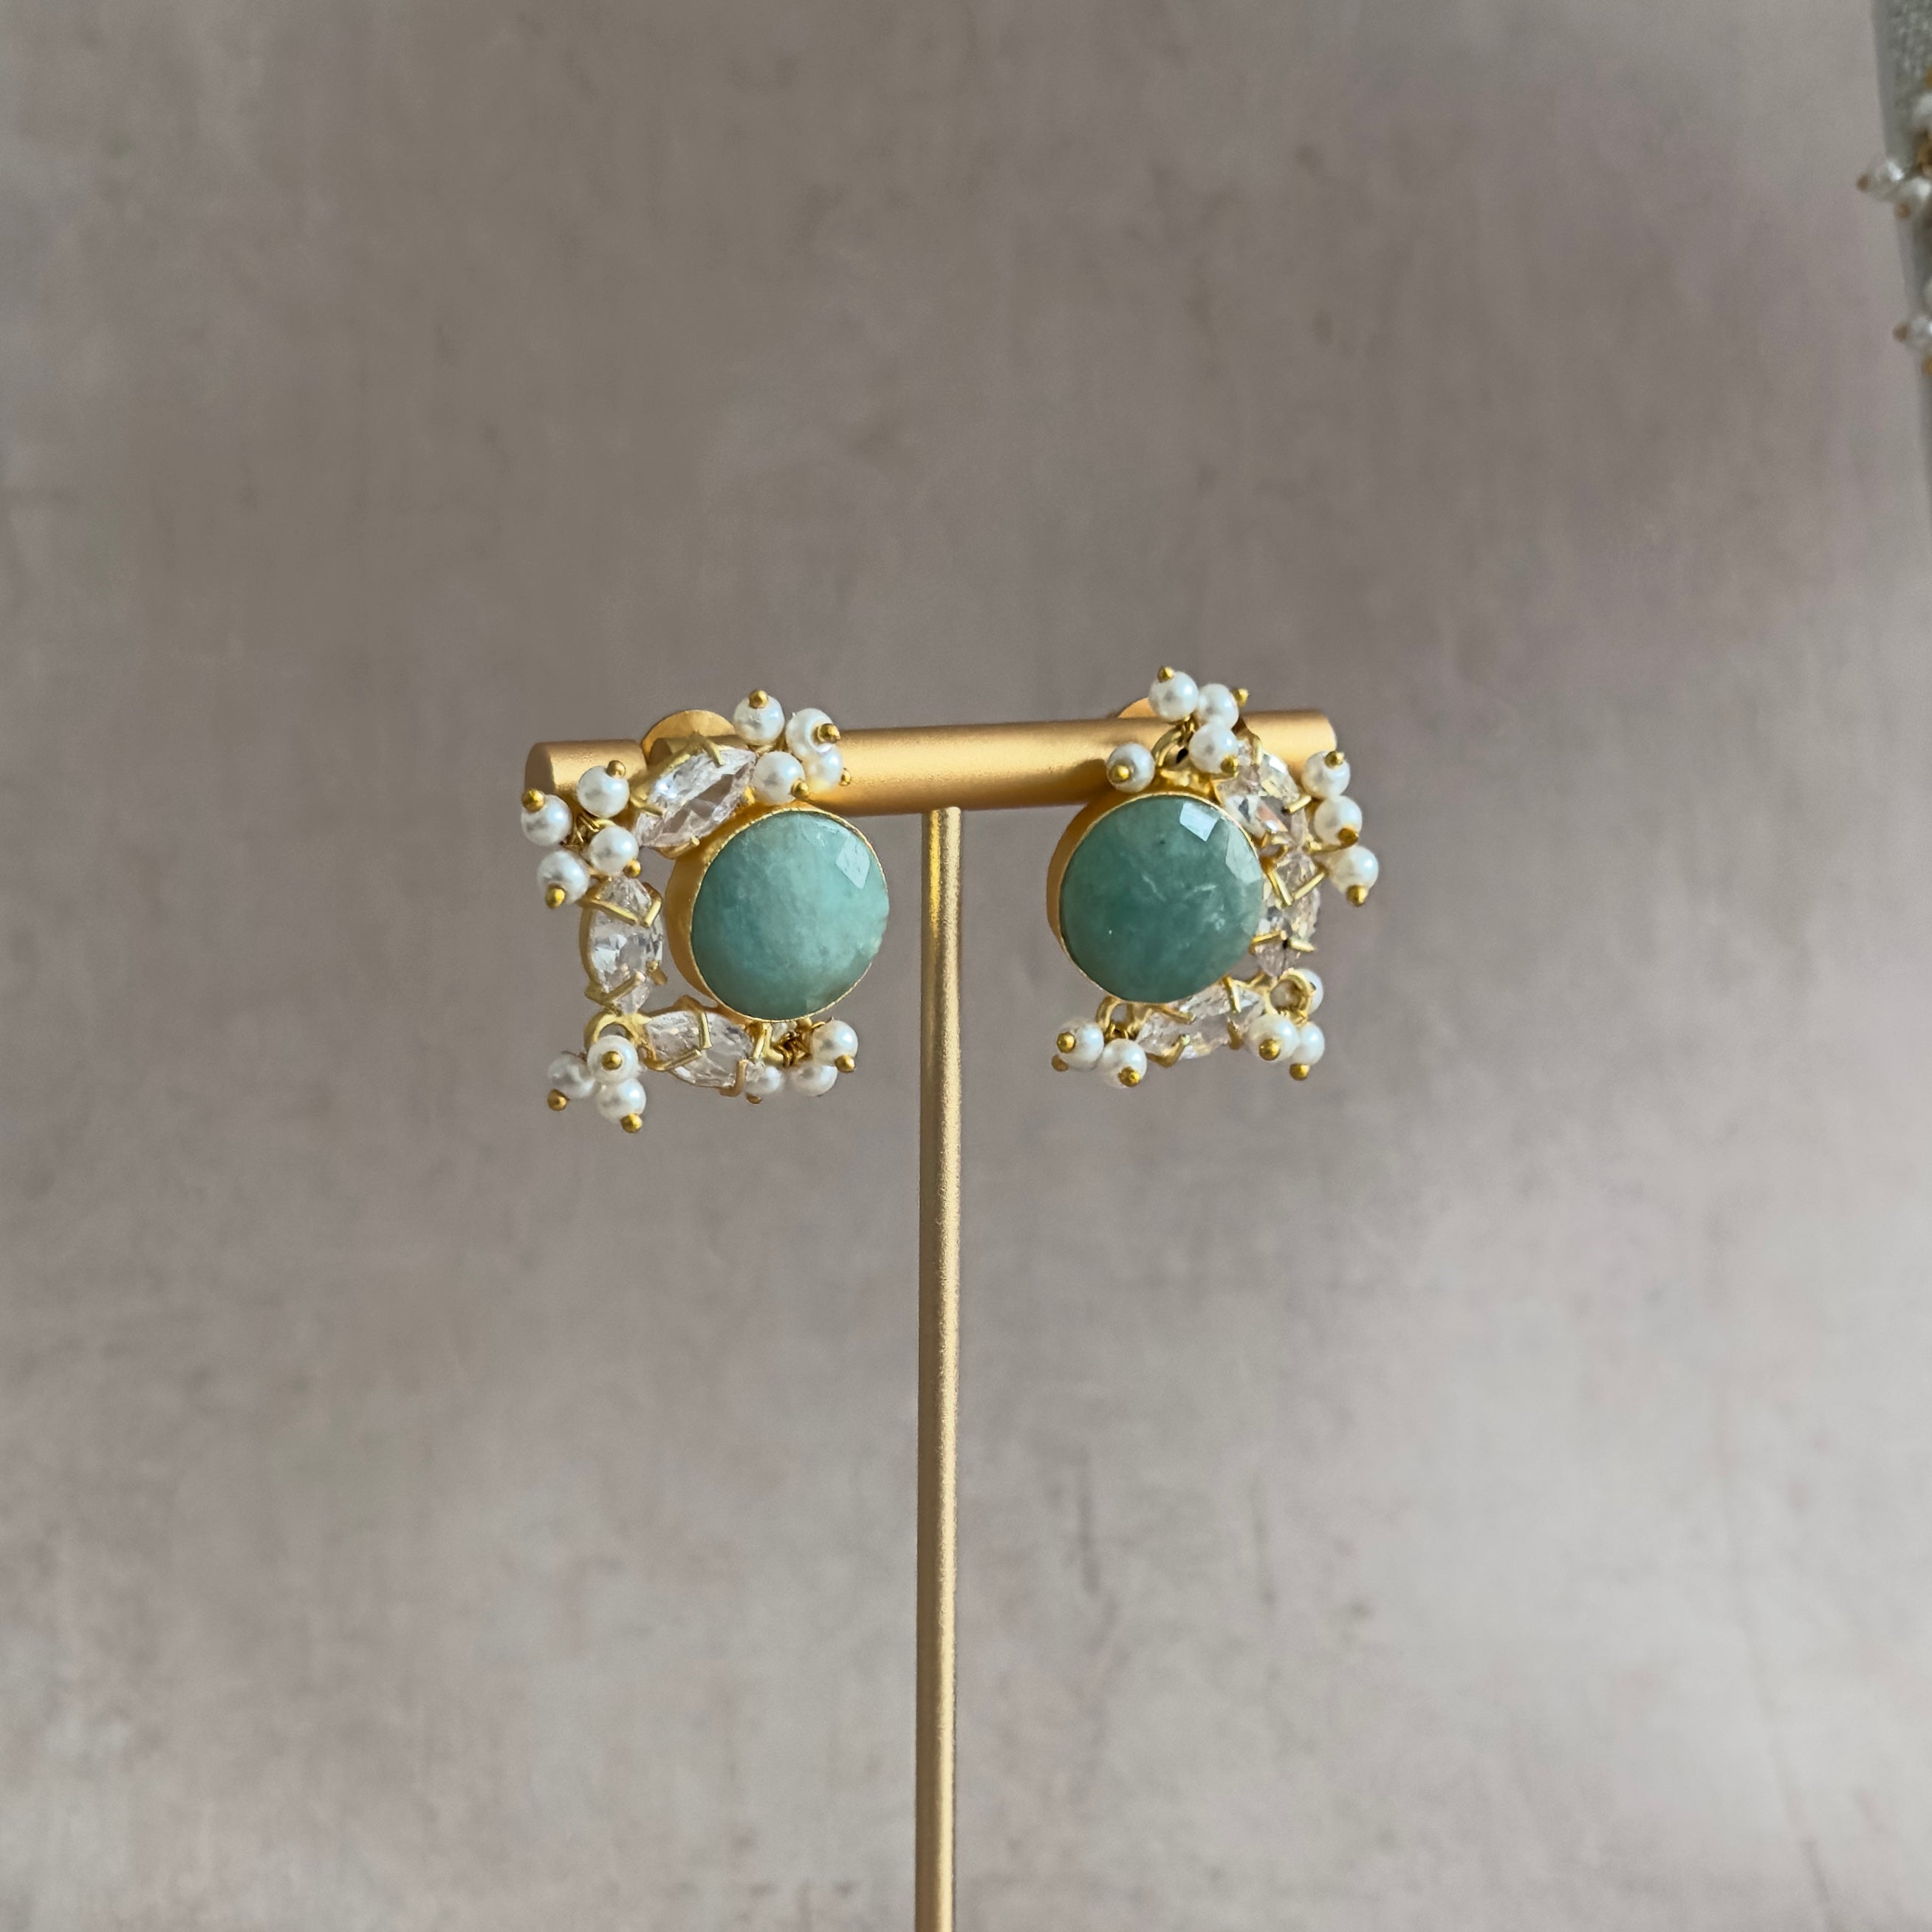 Elevate your look with our Suki Jade Choker Set, featuring stunning natural amazonite gemstones and luscious cubic zirconia for that extra sparkle. Complete your outfit with the matching tikka and earrings. Perfect for any occasion.